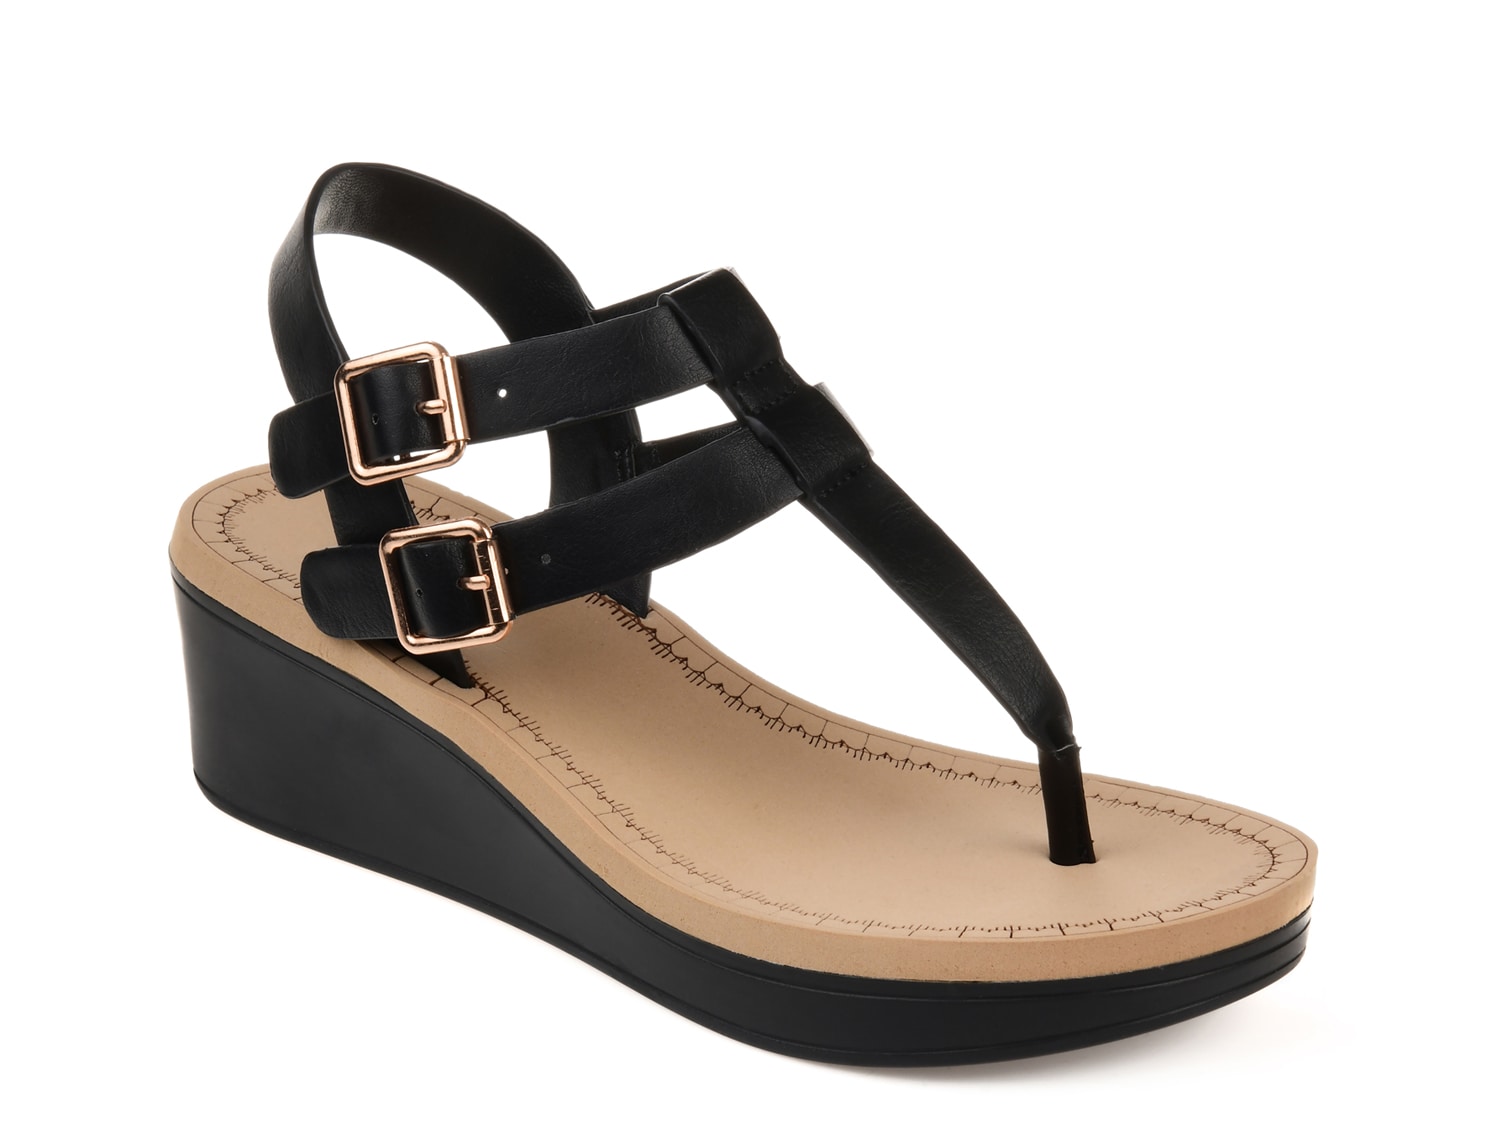 Journee Collection Bianca Wedge Sandal 